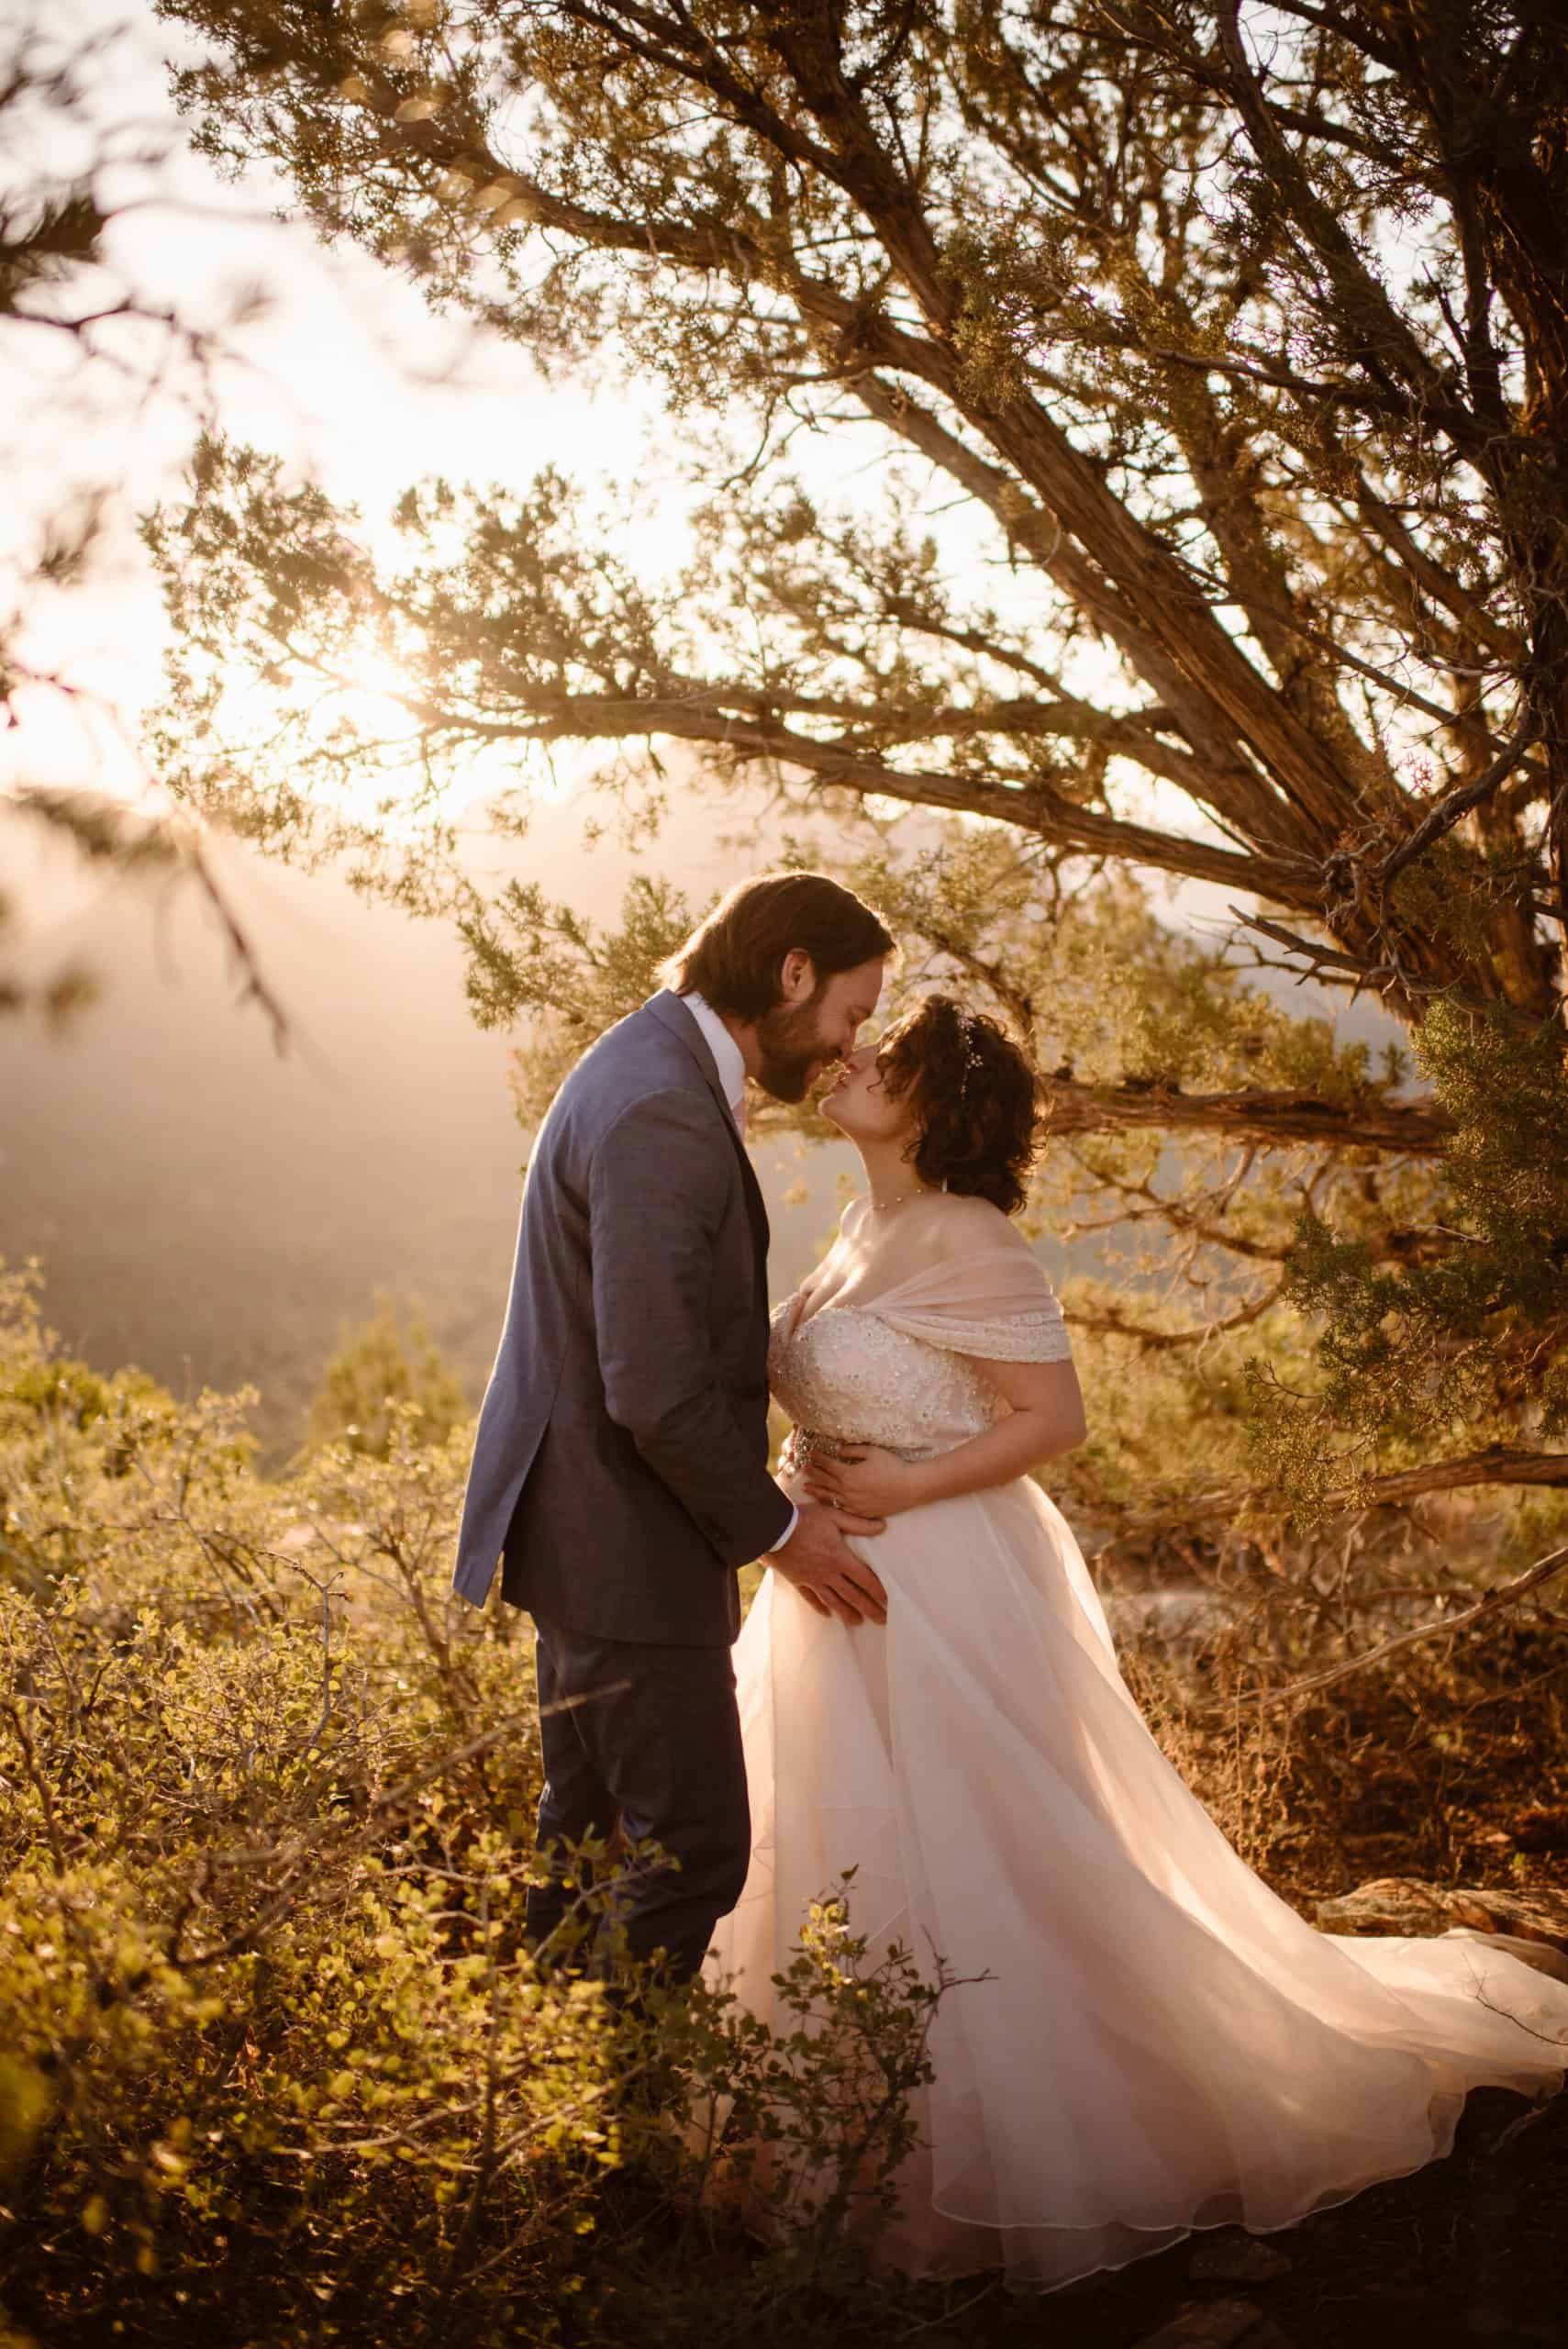 A bride and groom share a kiss among the desert trees of Sedona at sunrise